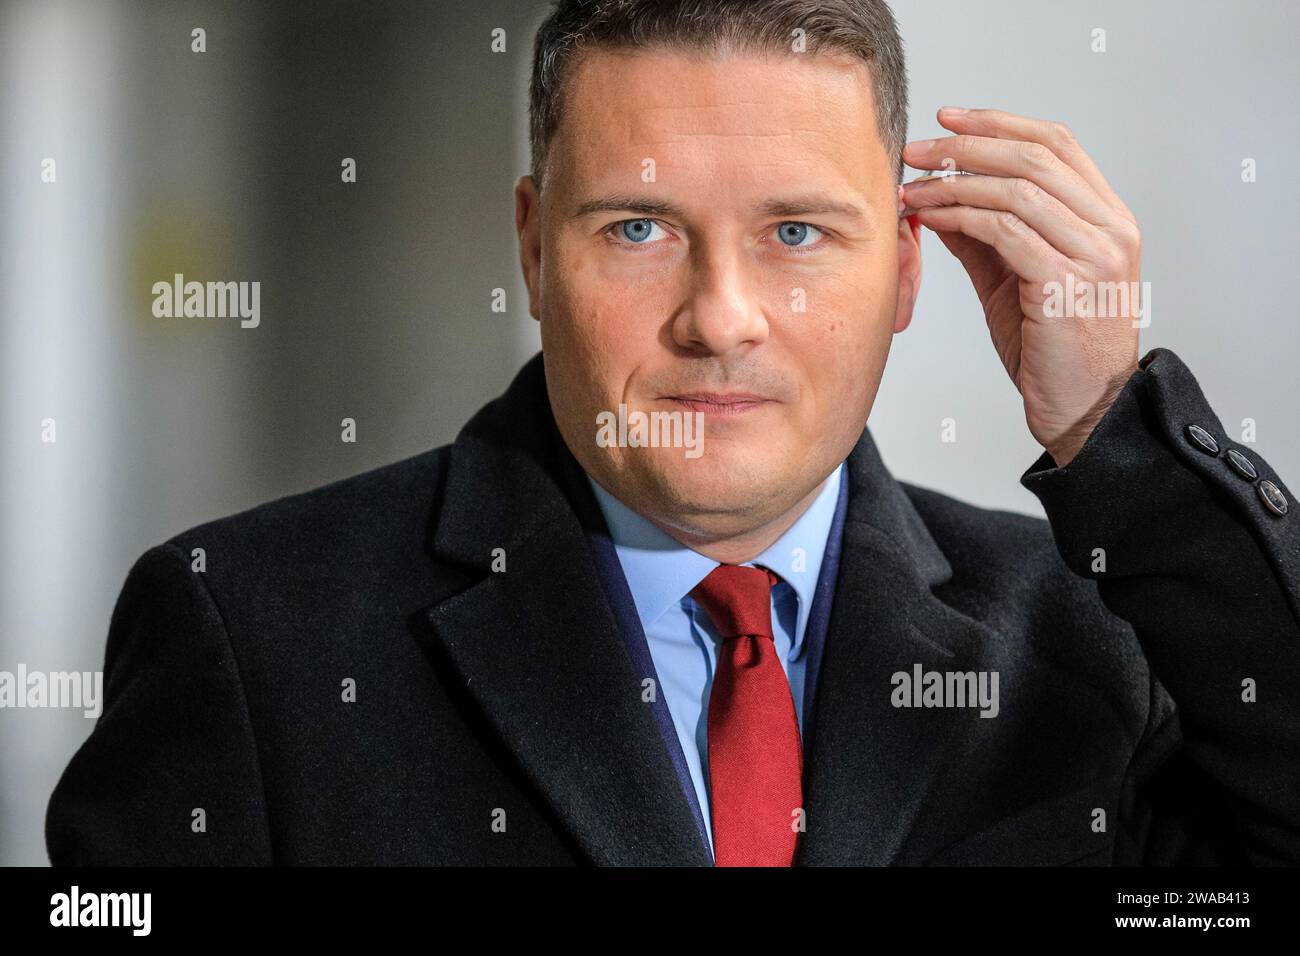 Wes Streeting, Shadow Health Secretary, British Labour Party politician outside the BBC studios, London, UK Stock Photo